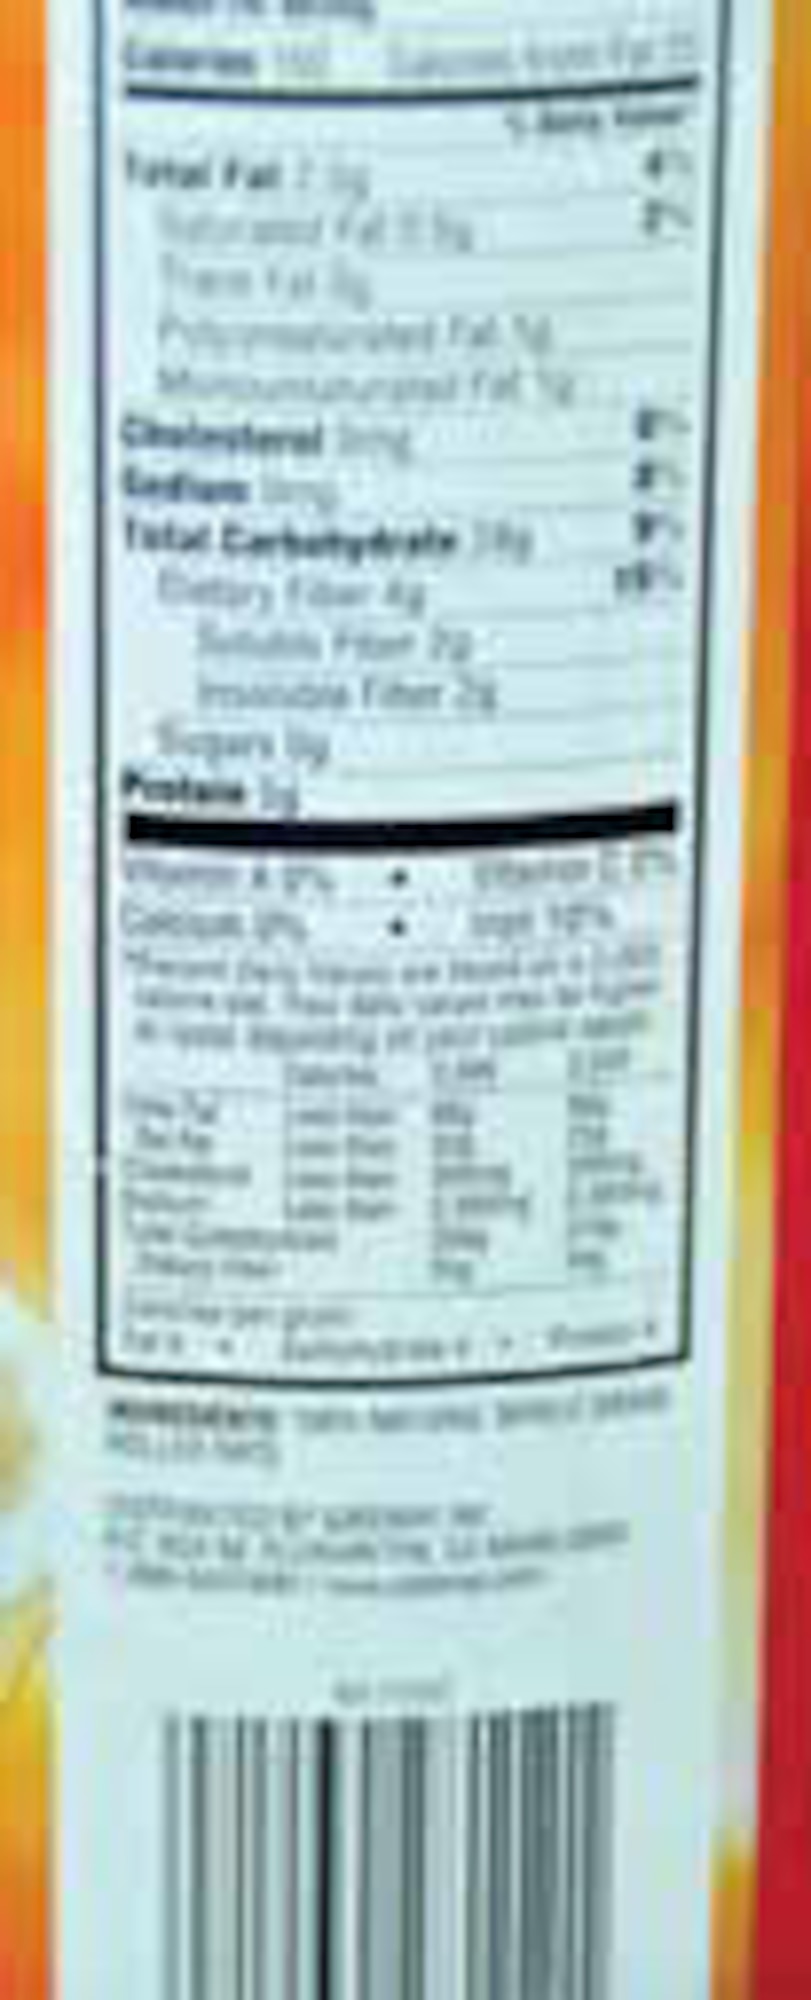 One step to promote your health transformation is to learn to read the labels on products and try to consume foods that are as close to their natural state as possible. In addition to the amount of sugar, carbohydrates, etc., also read the ingredients, and if you can’t pronounce them, they’re probably not good to ingest. (U.S. Air Force photo/Staff Sgt. Carrie Peasinger)